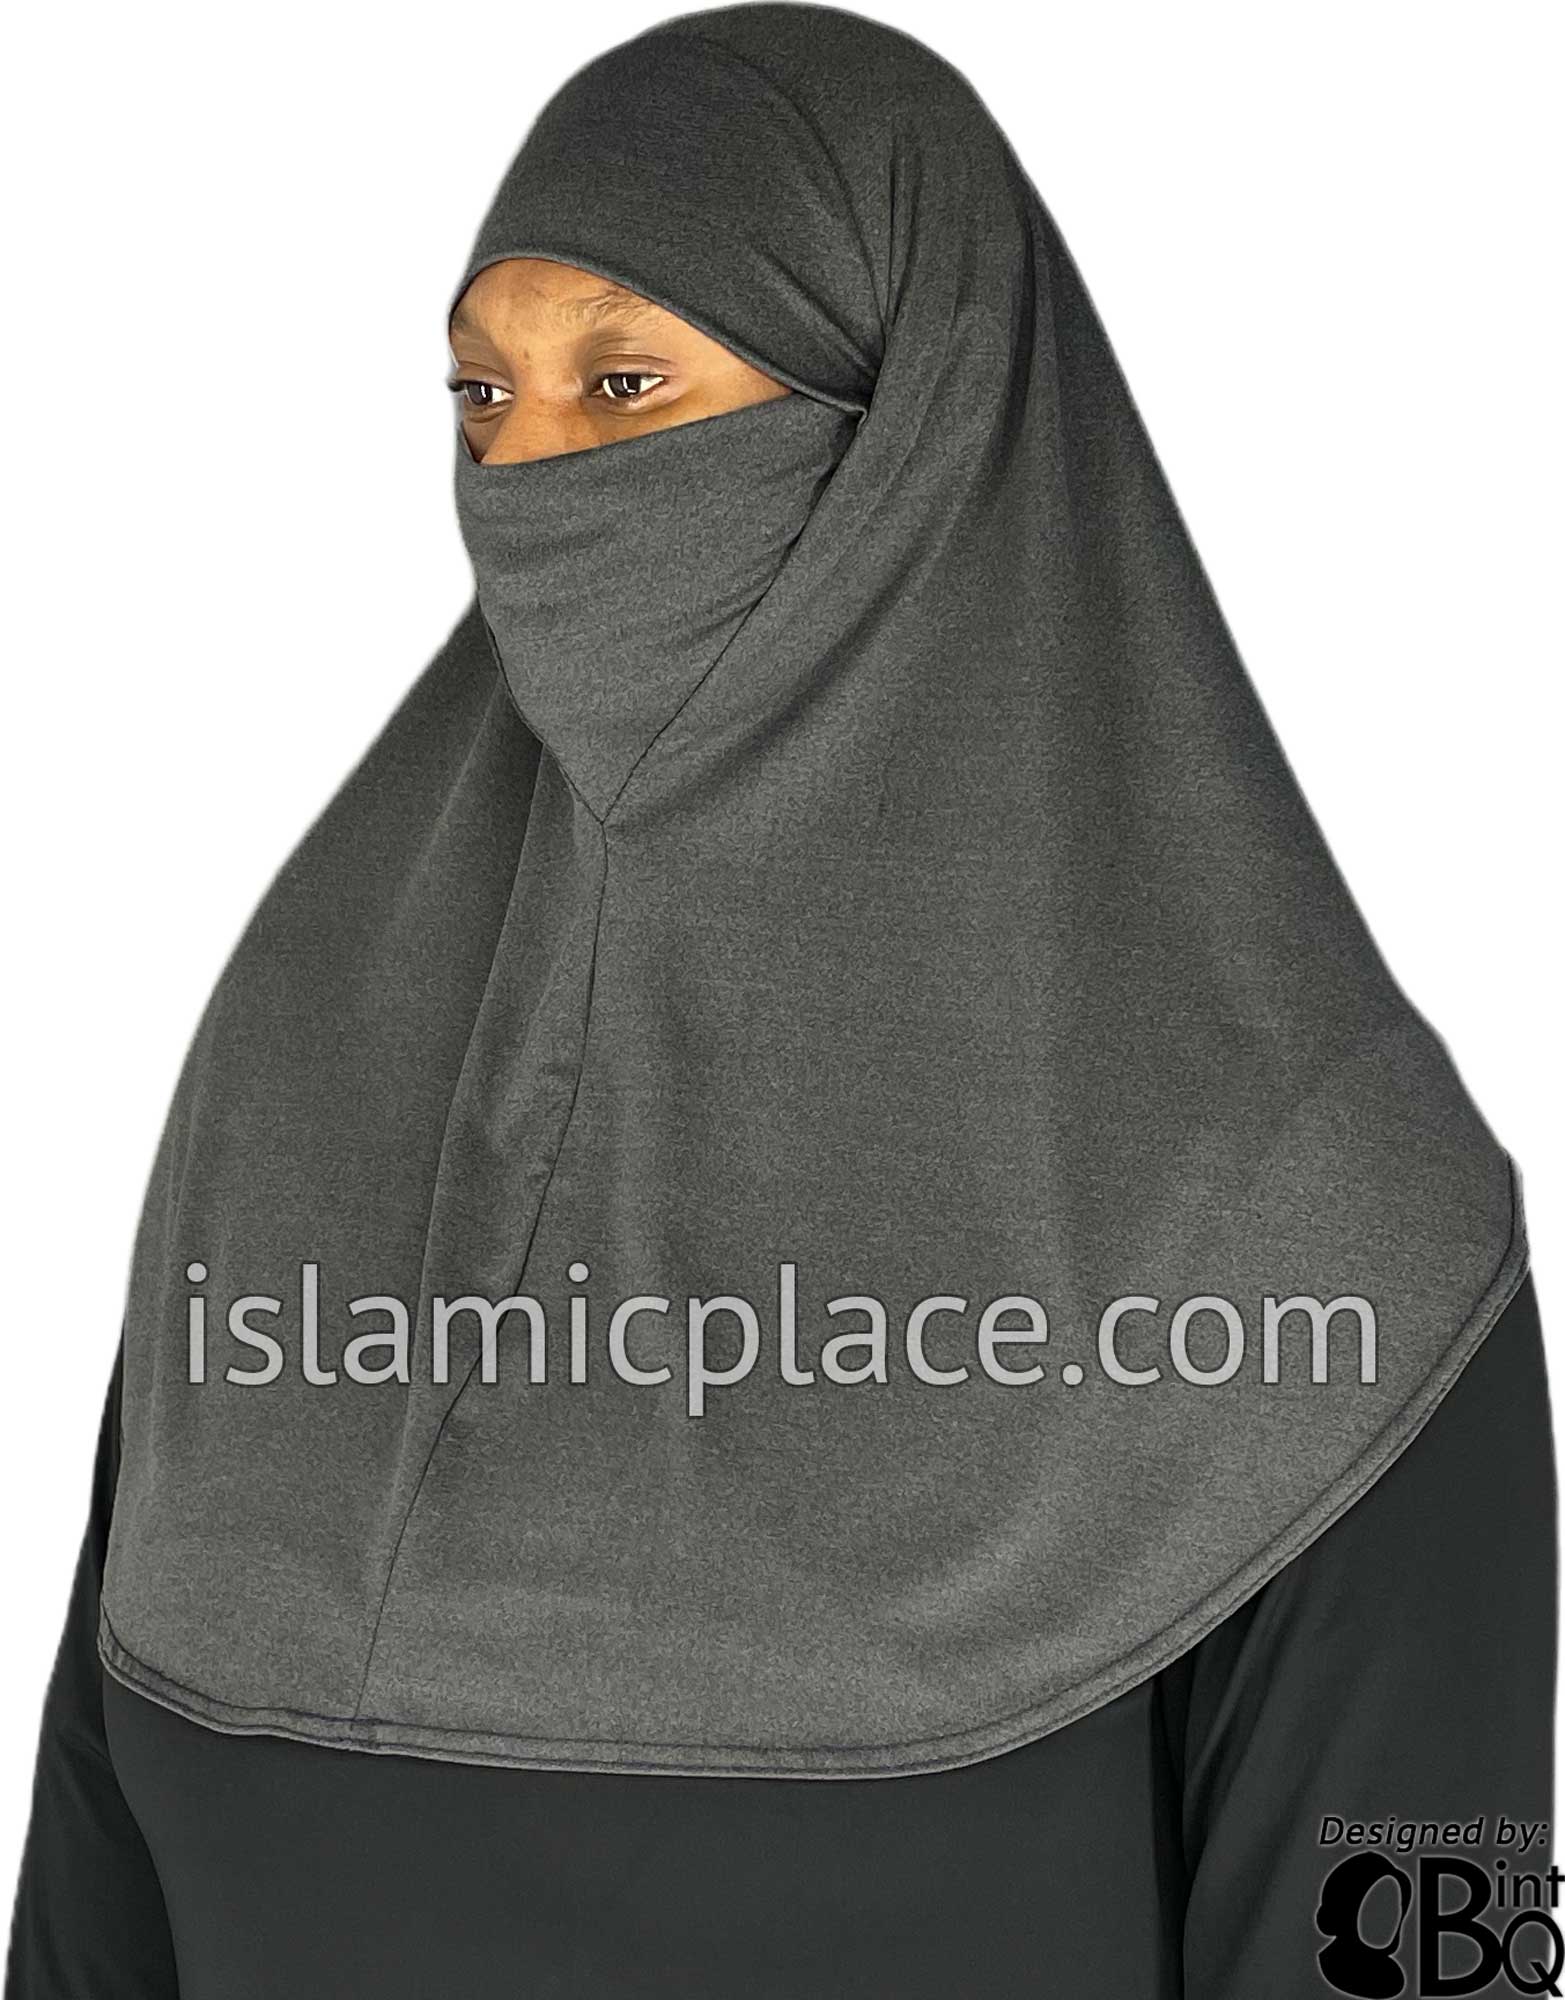 Heather Gray - Plain Teen to Adult (Large) Hijab Al-Amira with Built-in Niqab